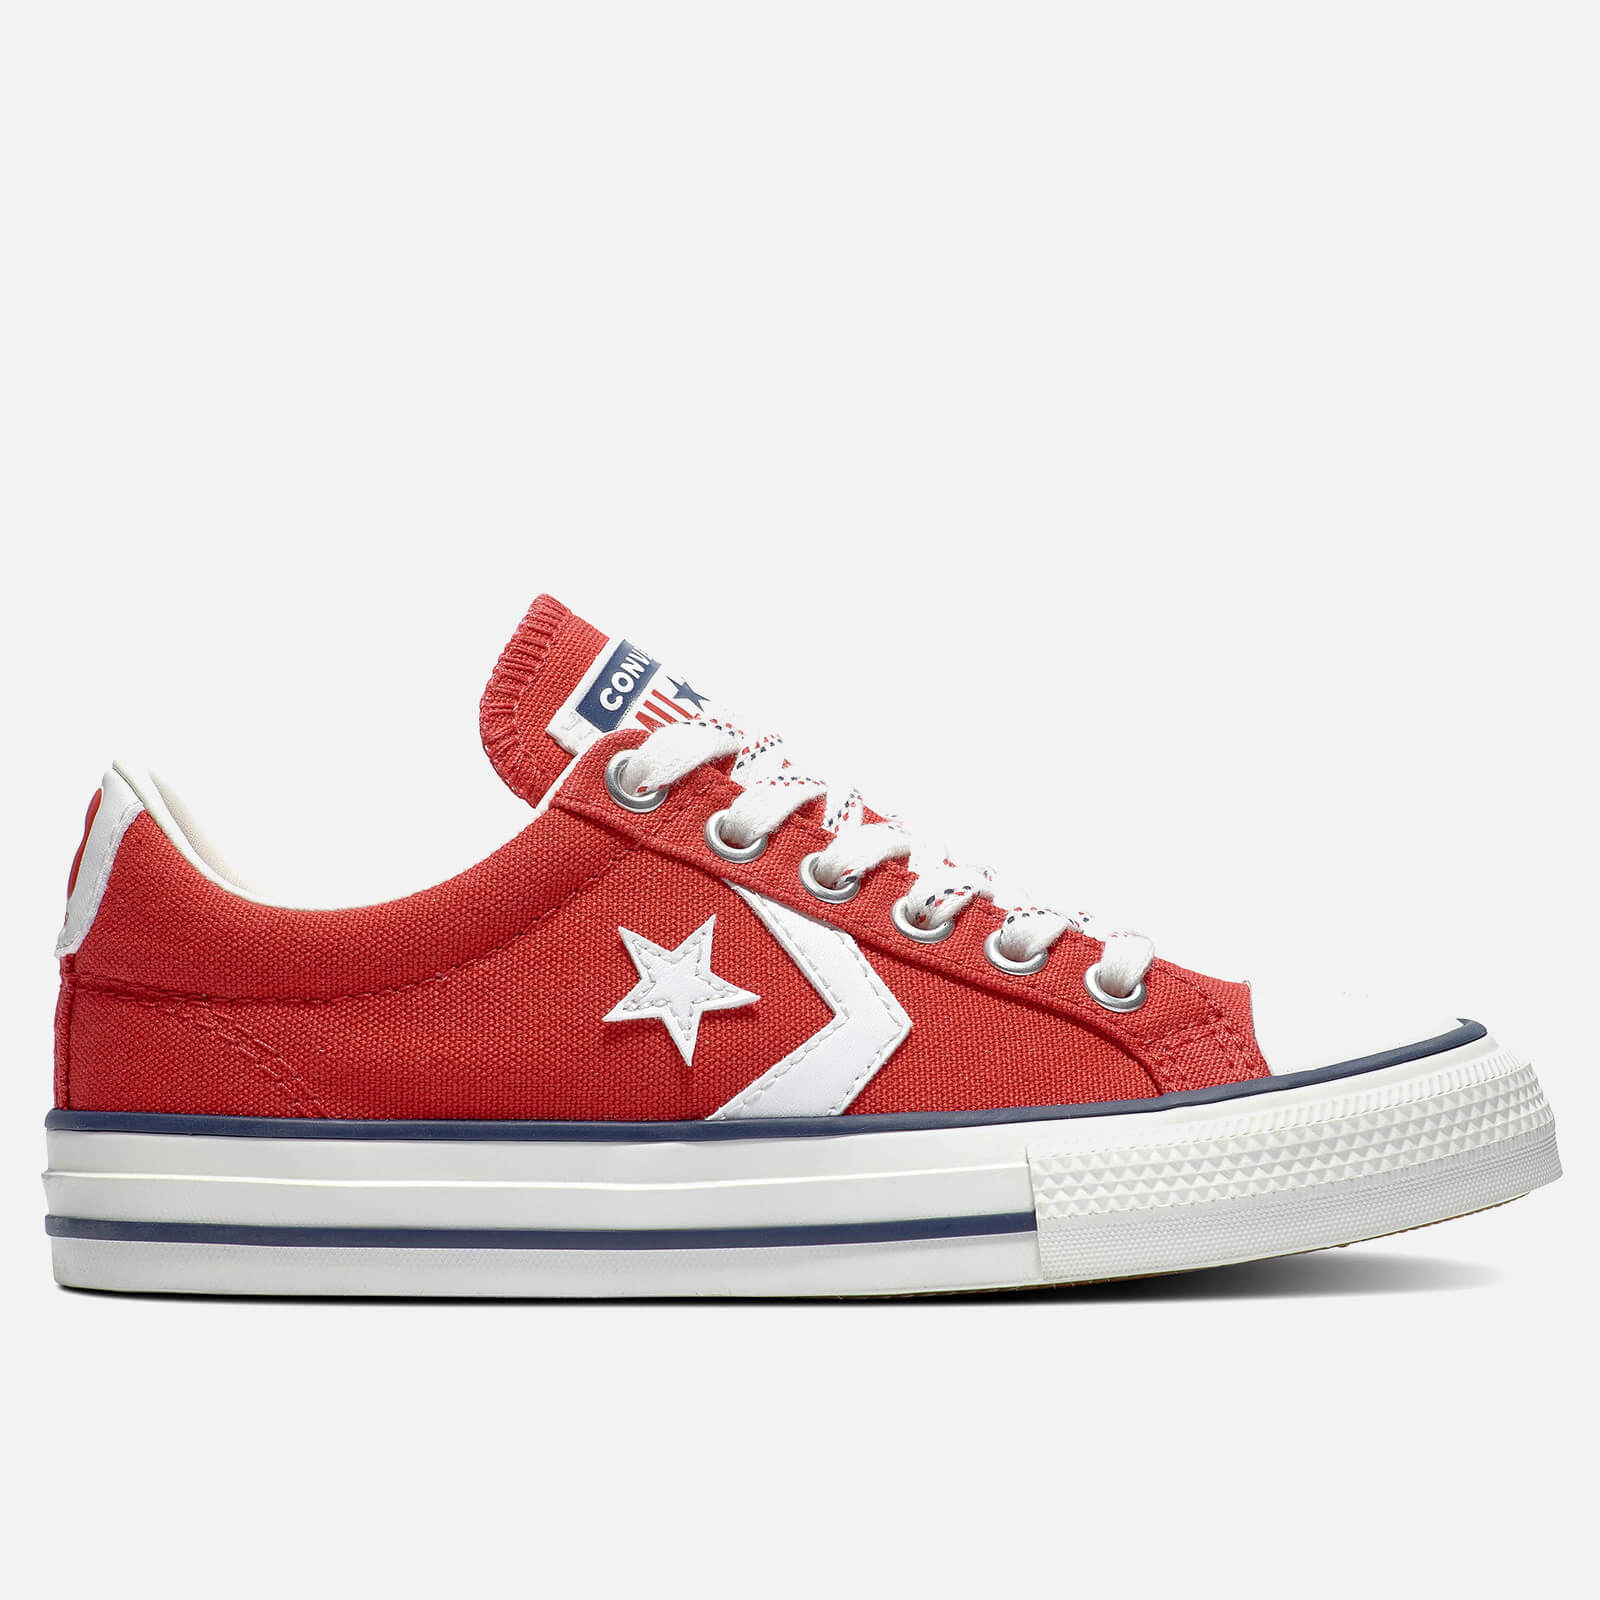 Converse Kids' Star Player Ox Trainers - Enamel Red - UK 1 Kids